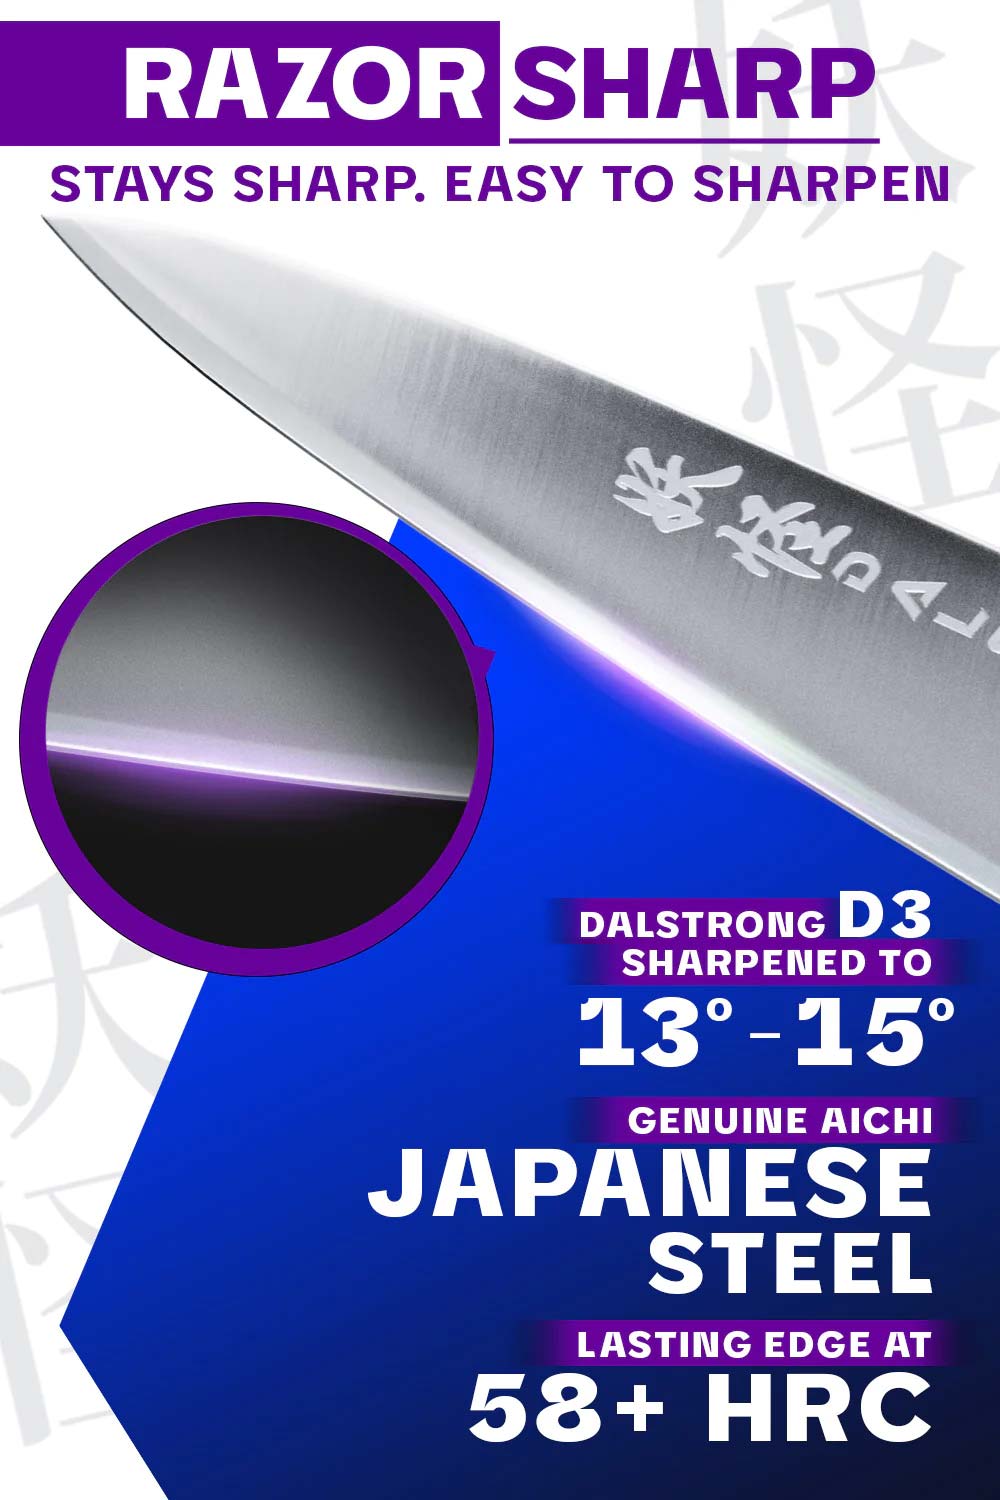 Dalstrong phantom series 8 inch chef knife with white handle featuring it's razor sharp japanese steel blade.